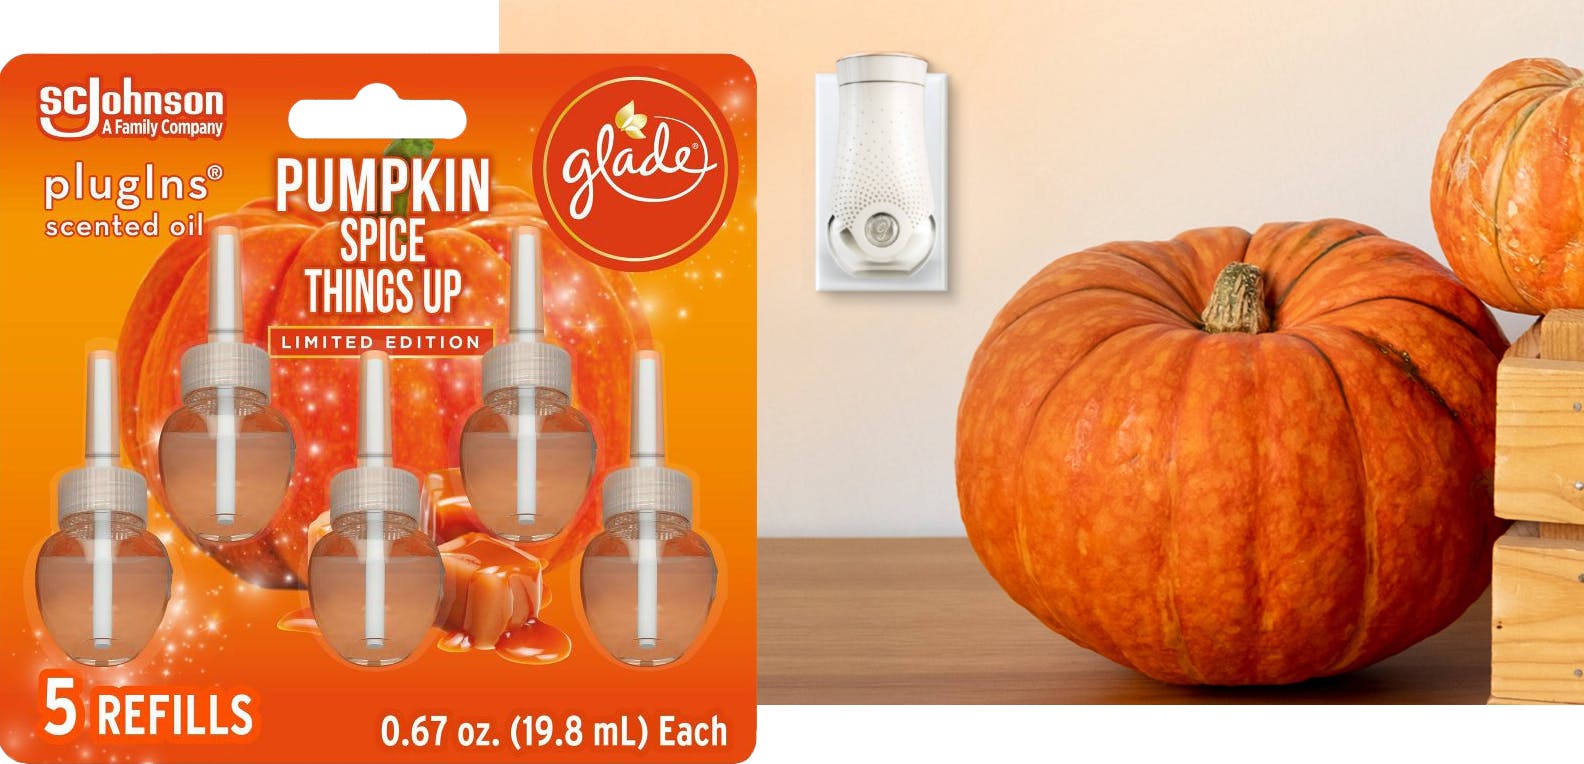 Pumpkin Spice Things Up Glade Plug-ins